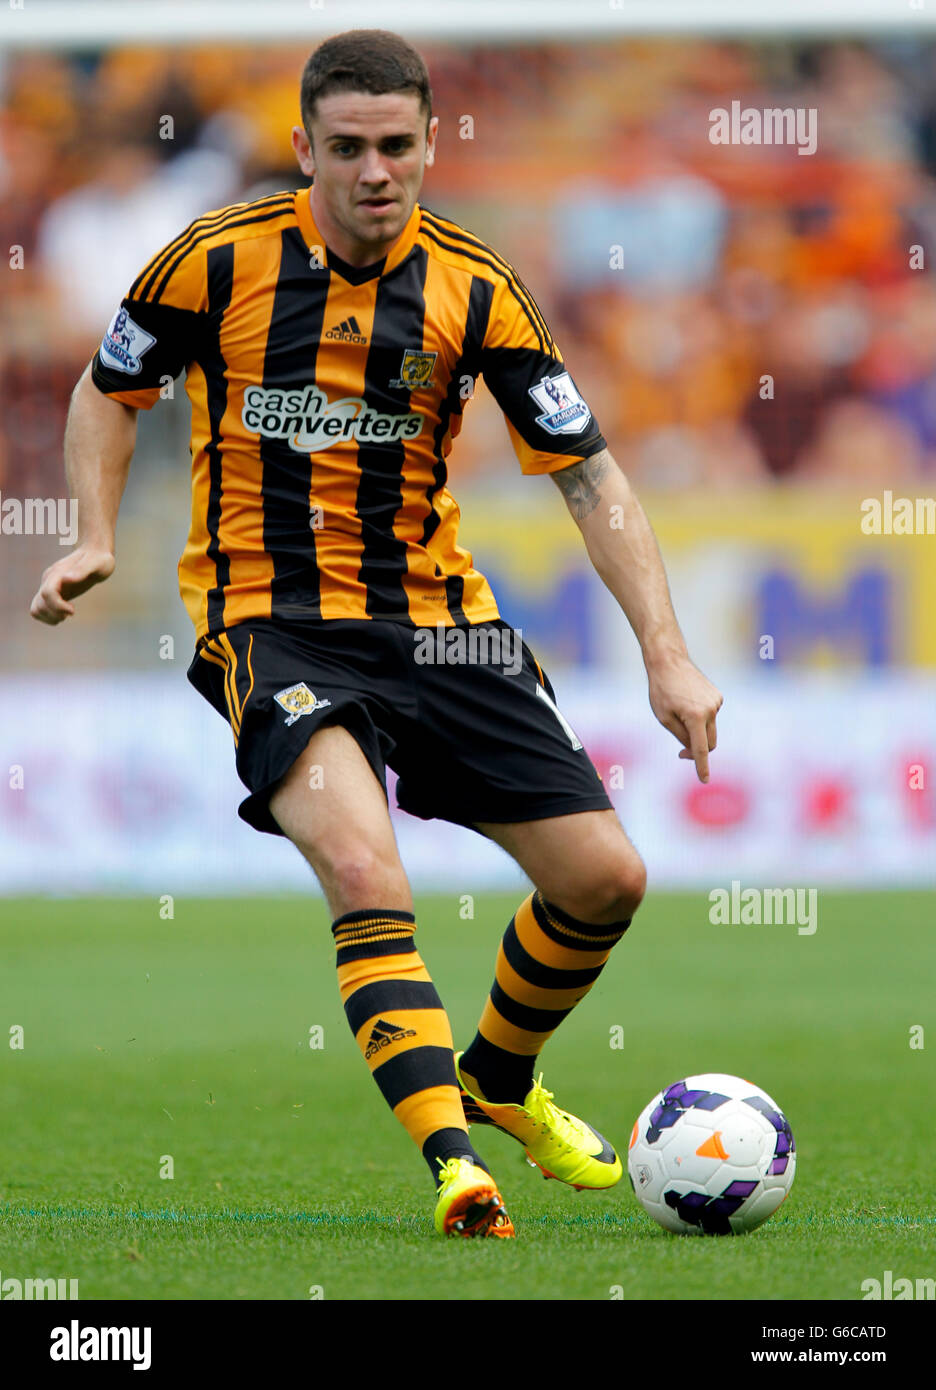 Football - Barclays Premier League - Hull City Tigers / Norwich City - KC Stadium. Robbie Brady, Hull City Tigers Banque D'Images